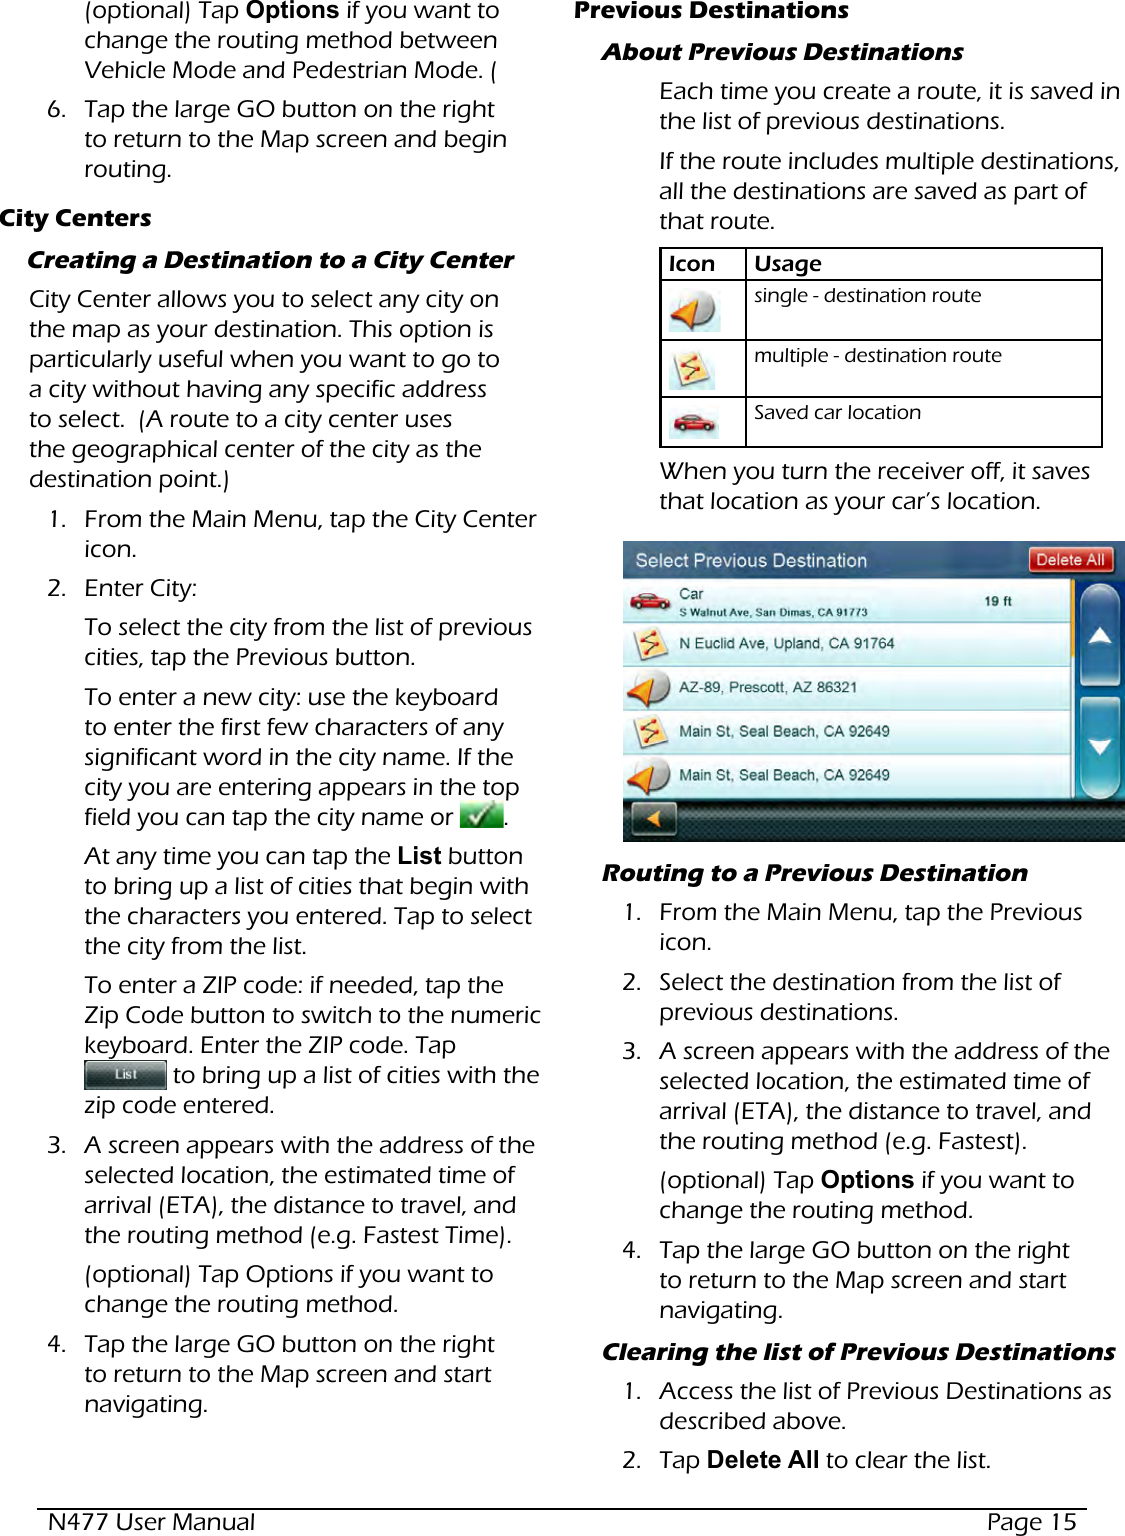 N477 User Manual  Page 15(optional) Tap Options if you want to change the routing method between Vehicle Mode and Pedestrian Mode. (6.  Tap the large GO button on the right to return to the Map screen and begin routing.City CentersCreating a Destination to a City CenterCity Center allows you to select any city on the map as your destination. This option is particularly useful when you want to go to a city without having any specific address to select.  (A route to a city center uses the geographical center of the city as the destination point.)1.  From the Main Menu, tap the City Center icon.  2.  Enter City:To select the city from the list of previous cities, tap the Previous button.To enter a new city: use the keyboard to enter the first few characters of any significant word in the city name. If the city you are entering appears in the top field you can tap the city name or  .  At any time you can tap the List button to bring up a list of cities that begin with the characters you entered. Tap to select the city from the list. To enter a ZIP code: if needed, tap the Zip Code button to switch to the numeric keyboard. Enter the ZIP code. Tap   to bring up a list of cities with the zip code entered.3.  A screen appears with the address of the selected location, the estimated time of arrival (ETA), the distance to travel, and the routing method (e.g. Fastest Time).(optional) Tap Options if you want to change the routing method.4.  Tap the large GO button on the right to return to the Map screen and start navigating.Previous DestinationsAbout Previous DestinationsEach time you create a route, it is saved in the list of previous destinations. If the route includes multiple destinations, all the destinations are saved as part of that route.Icon Usagesingle - destination routemultiple - destination routeSaved car locationWhen you turn the receiver off, it saves that location as your car’s location.  Routing to a Previous Destination1.  From the Main Menu, tap the Previous icon.  2.  Select the destination from the list of previous destinations.3.  A screen appears with the address of the selected location, the estimated time of arrival (ETA), the distance to travel, and the routing method (e.g. Fastest).(optional) Tap Options if you want to change the routing method.4.  Tap the large GO button on the right to return to the Map screen and start navigating.Clearing the list of Previous Destinations1.  Access the list of Previous Destinations as described above.2.  Tap Delete All to clear the list.